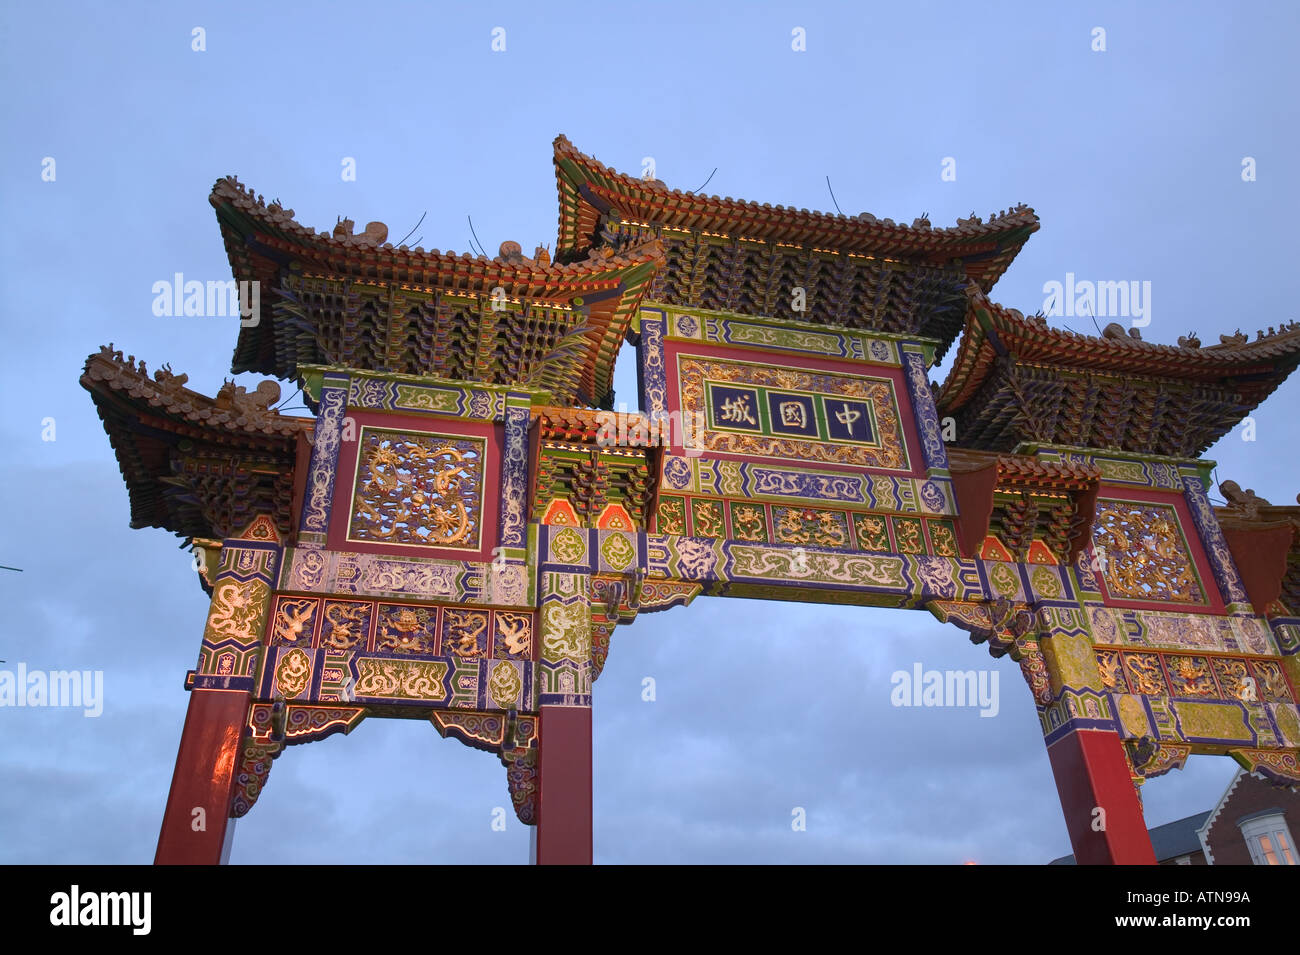 the chinese arch Chinatown liverpool Stock Photo